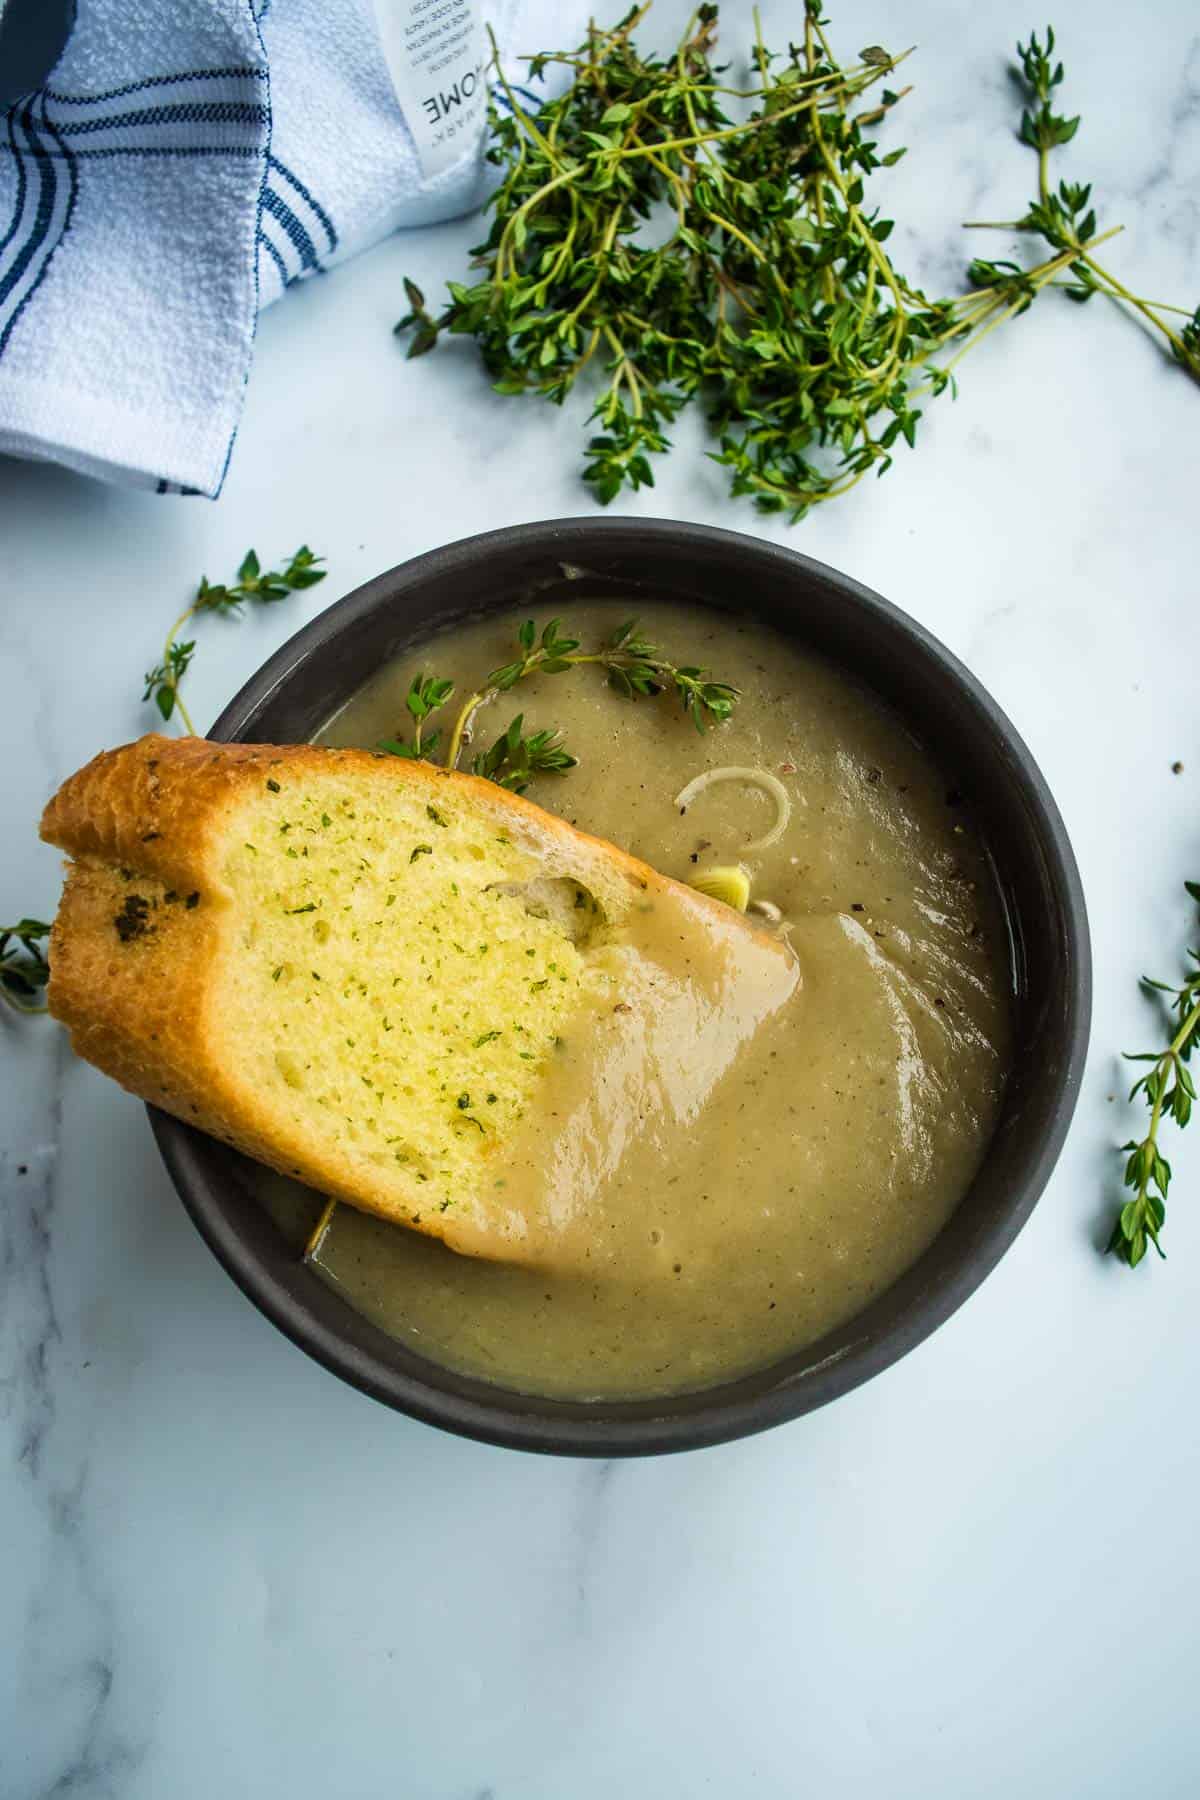 Garlic bread dipped into a bowl of soup.